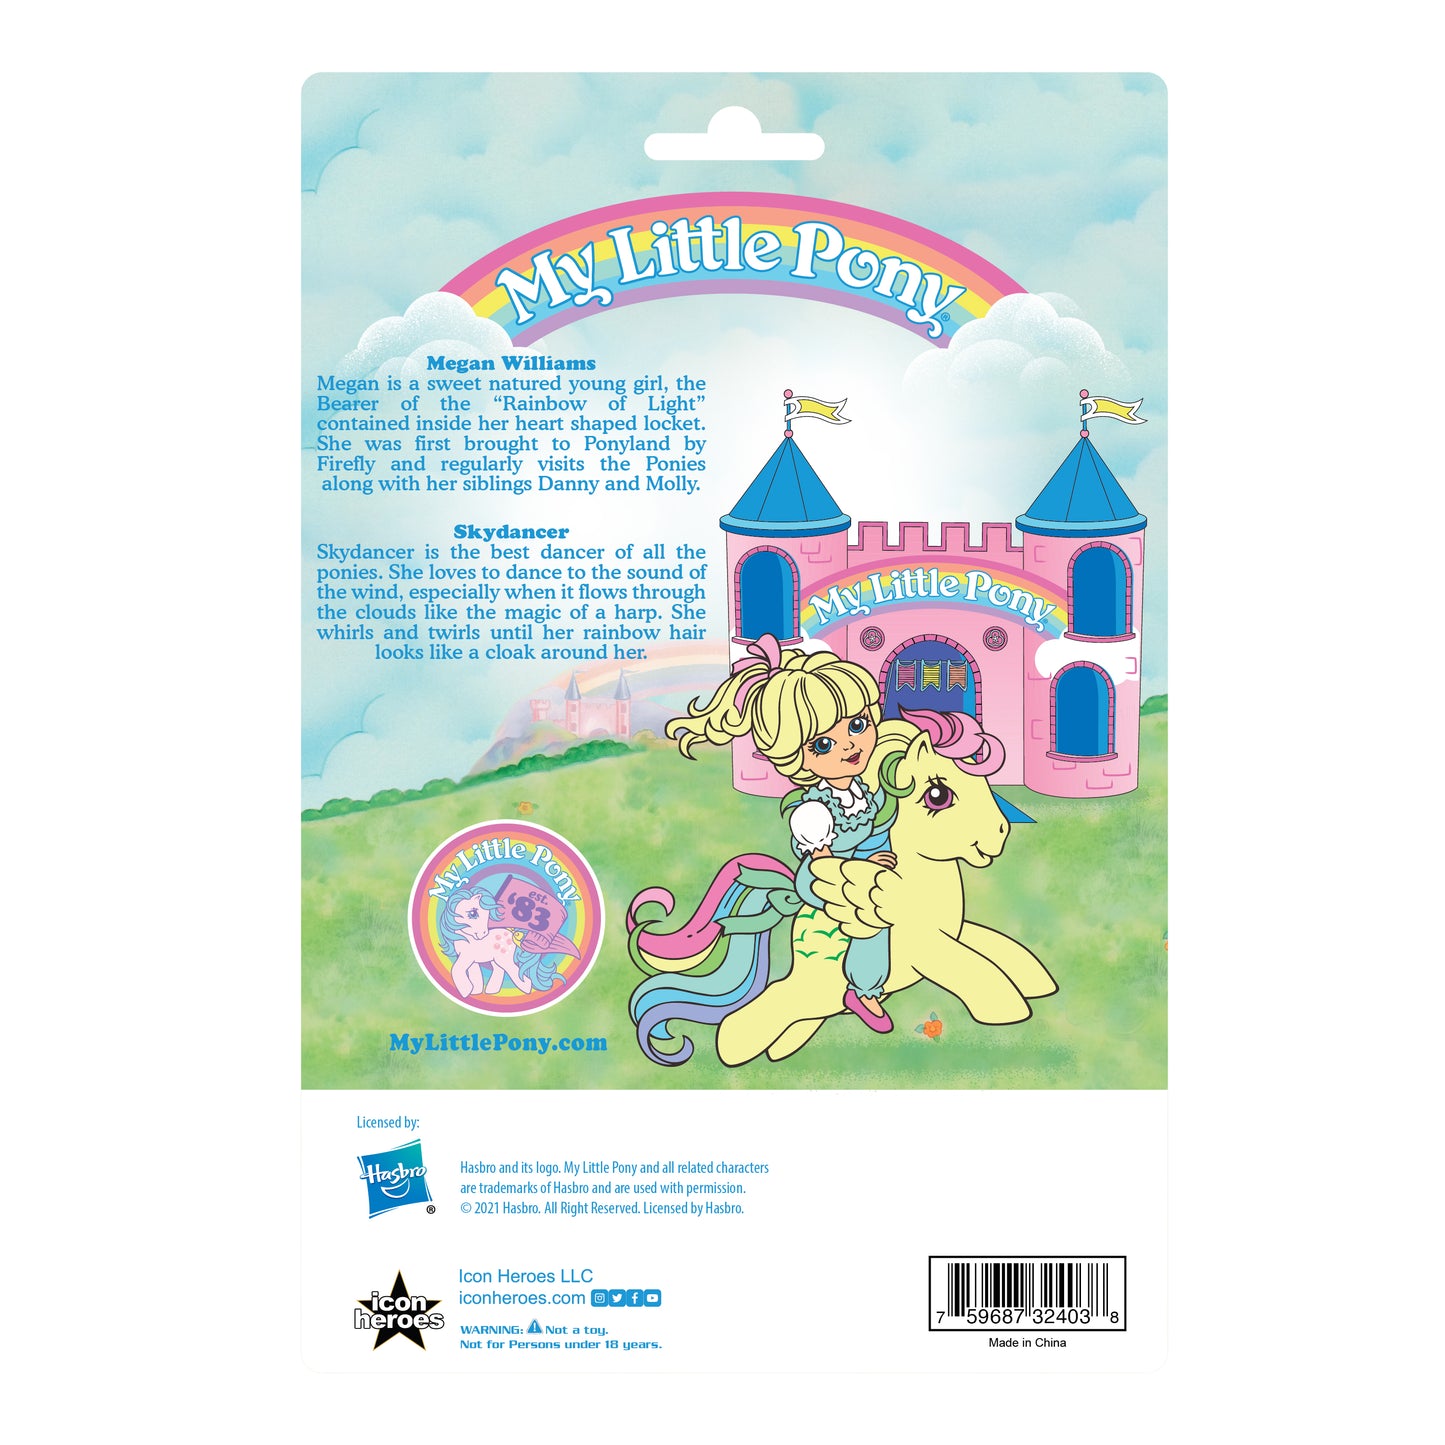 My Little Pony Megan and Skydancer X Dream Castle Retro Pin Set (SDCC Exclusive) - Icon Heroes 